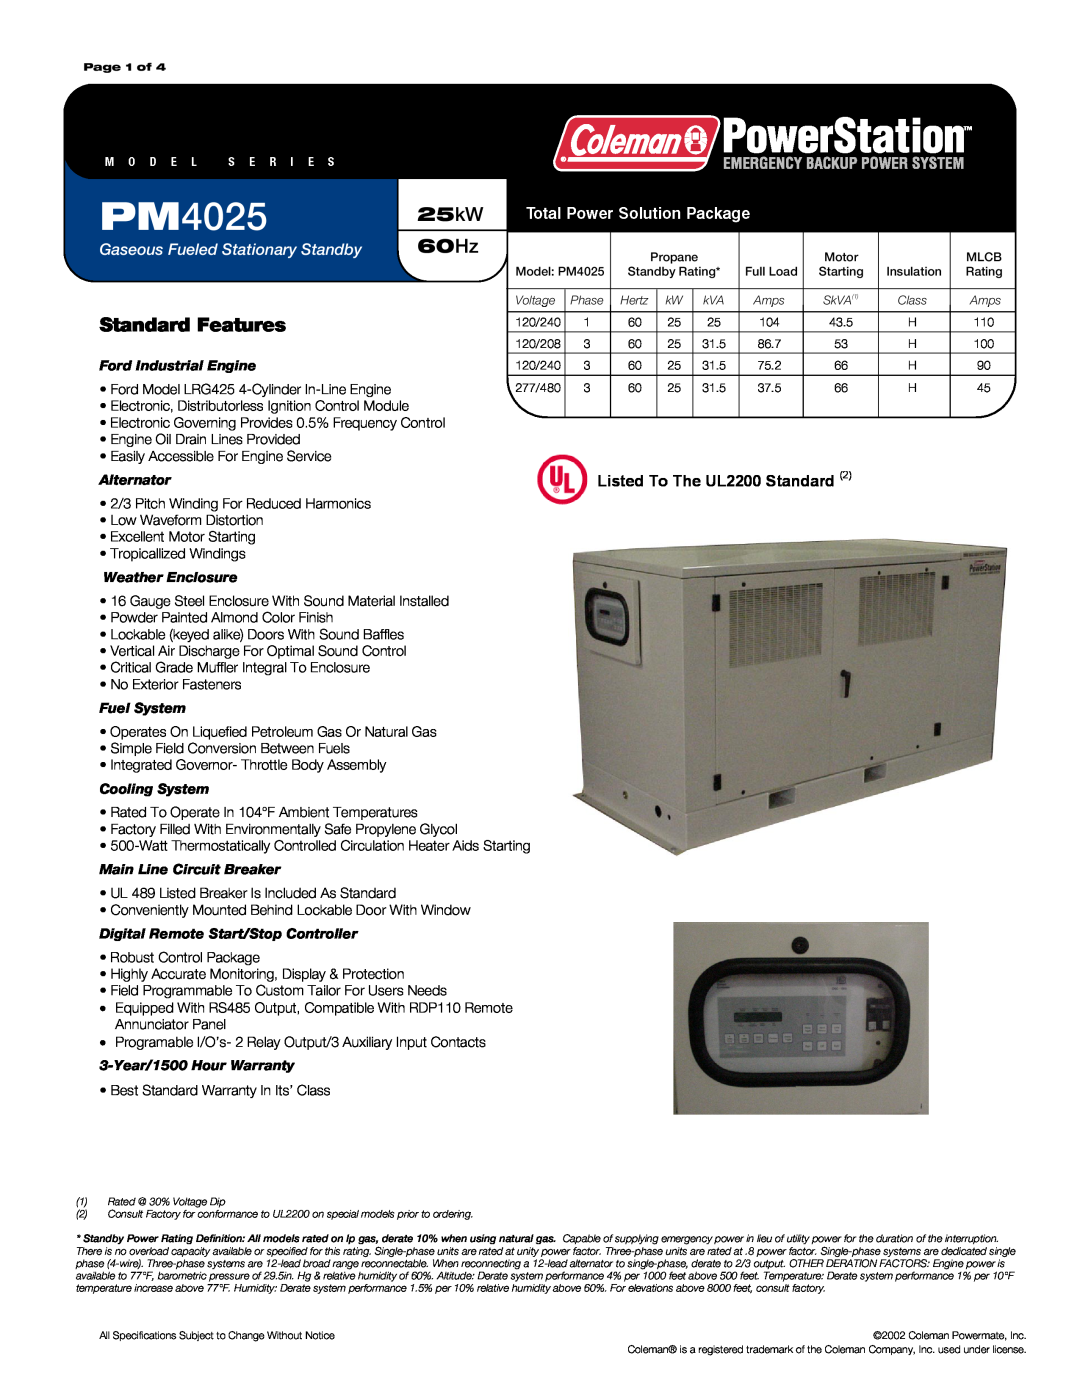 Powermate PM4025 warranty 25kW, 60Hz, Standard Features, Gaseous Fueled Stationary Standby, Ford Industrial Engine 